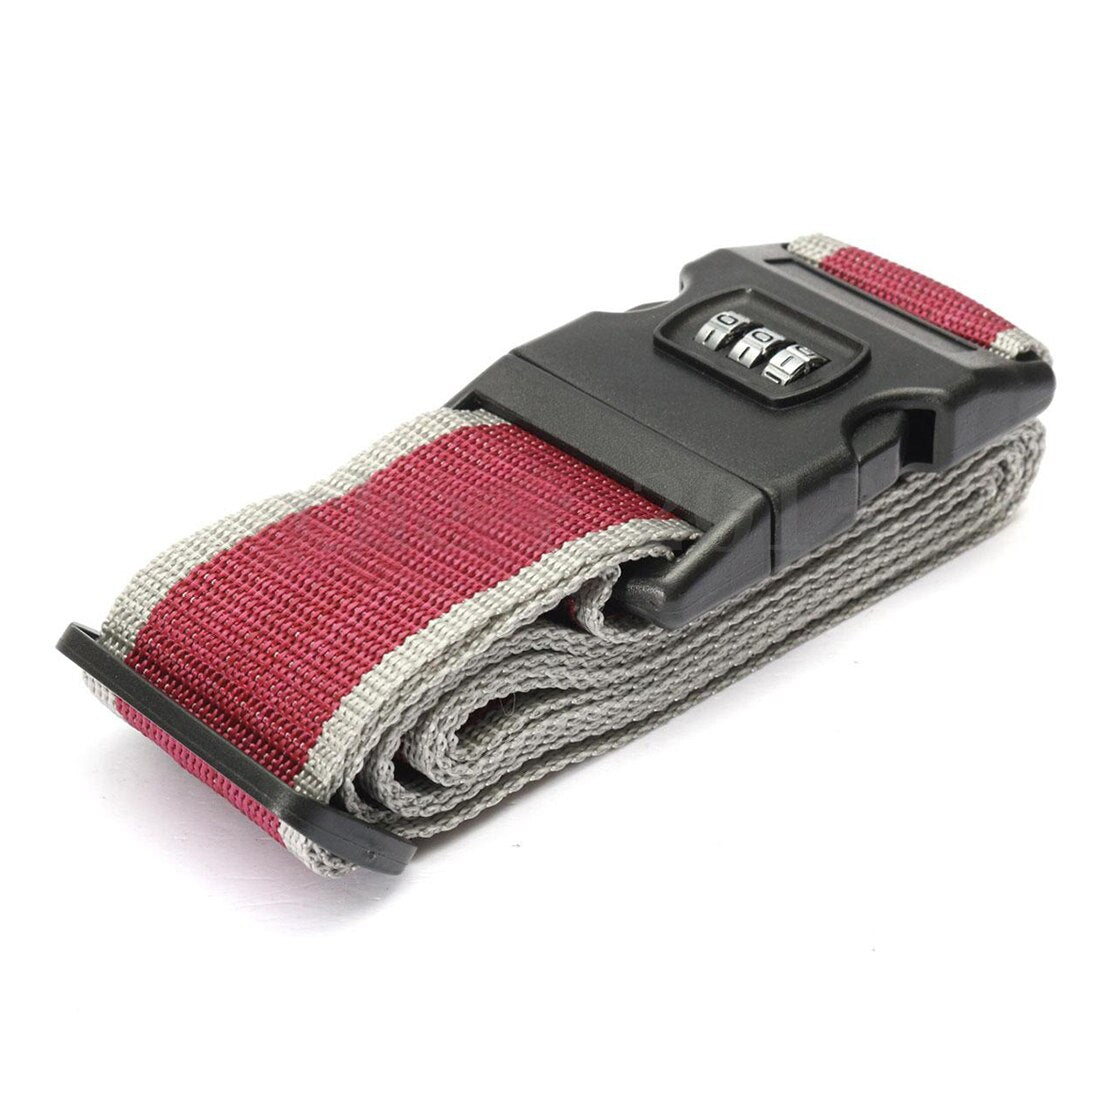 Safety belt Belt Lock Combination Travel Luggage Suitcase band color:gray red - ebowsos